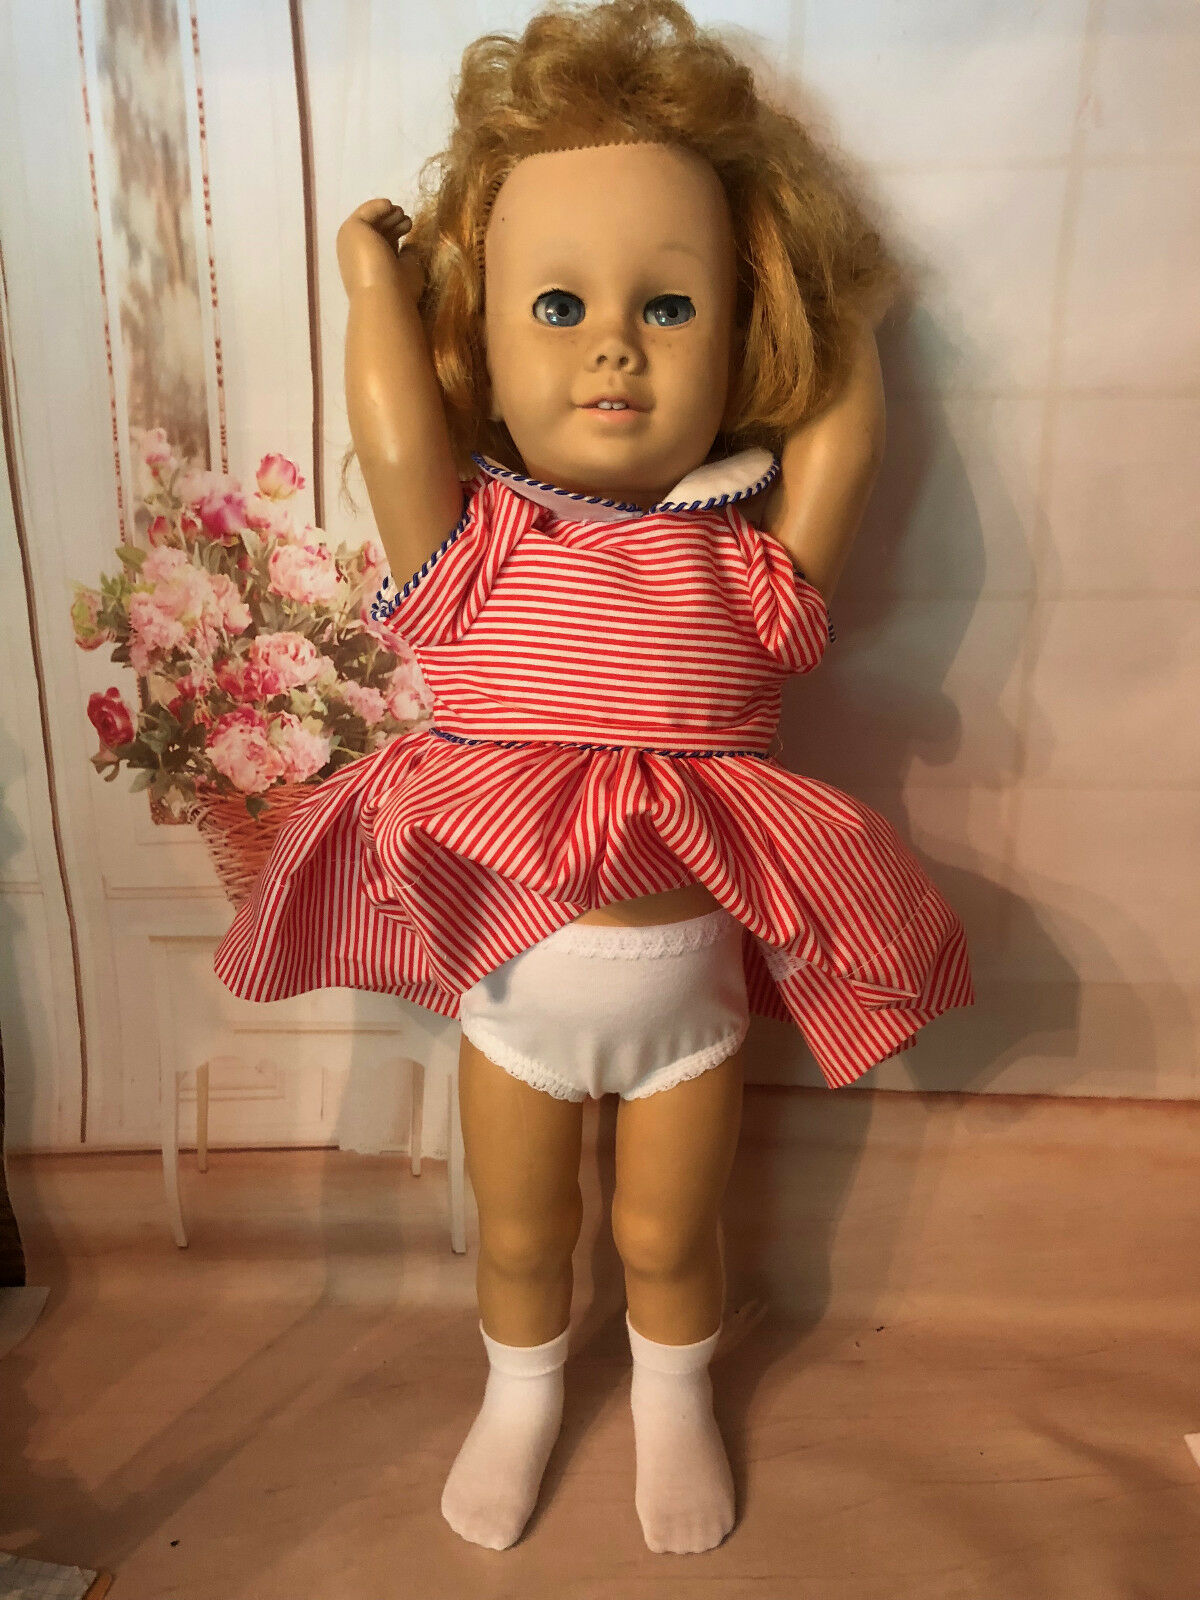 White Ankle Socks For 19" Vintage Chatty Cathy Doll